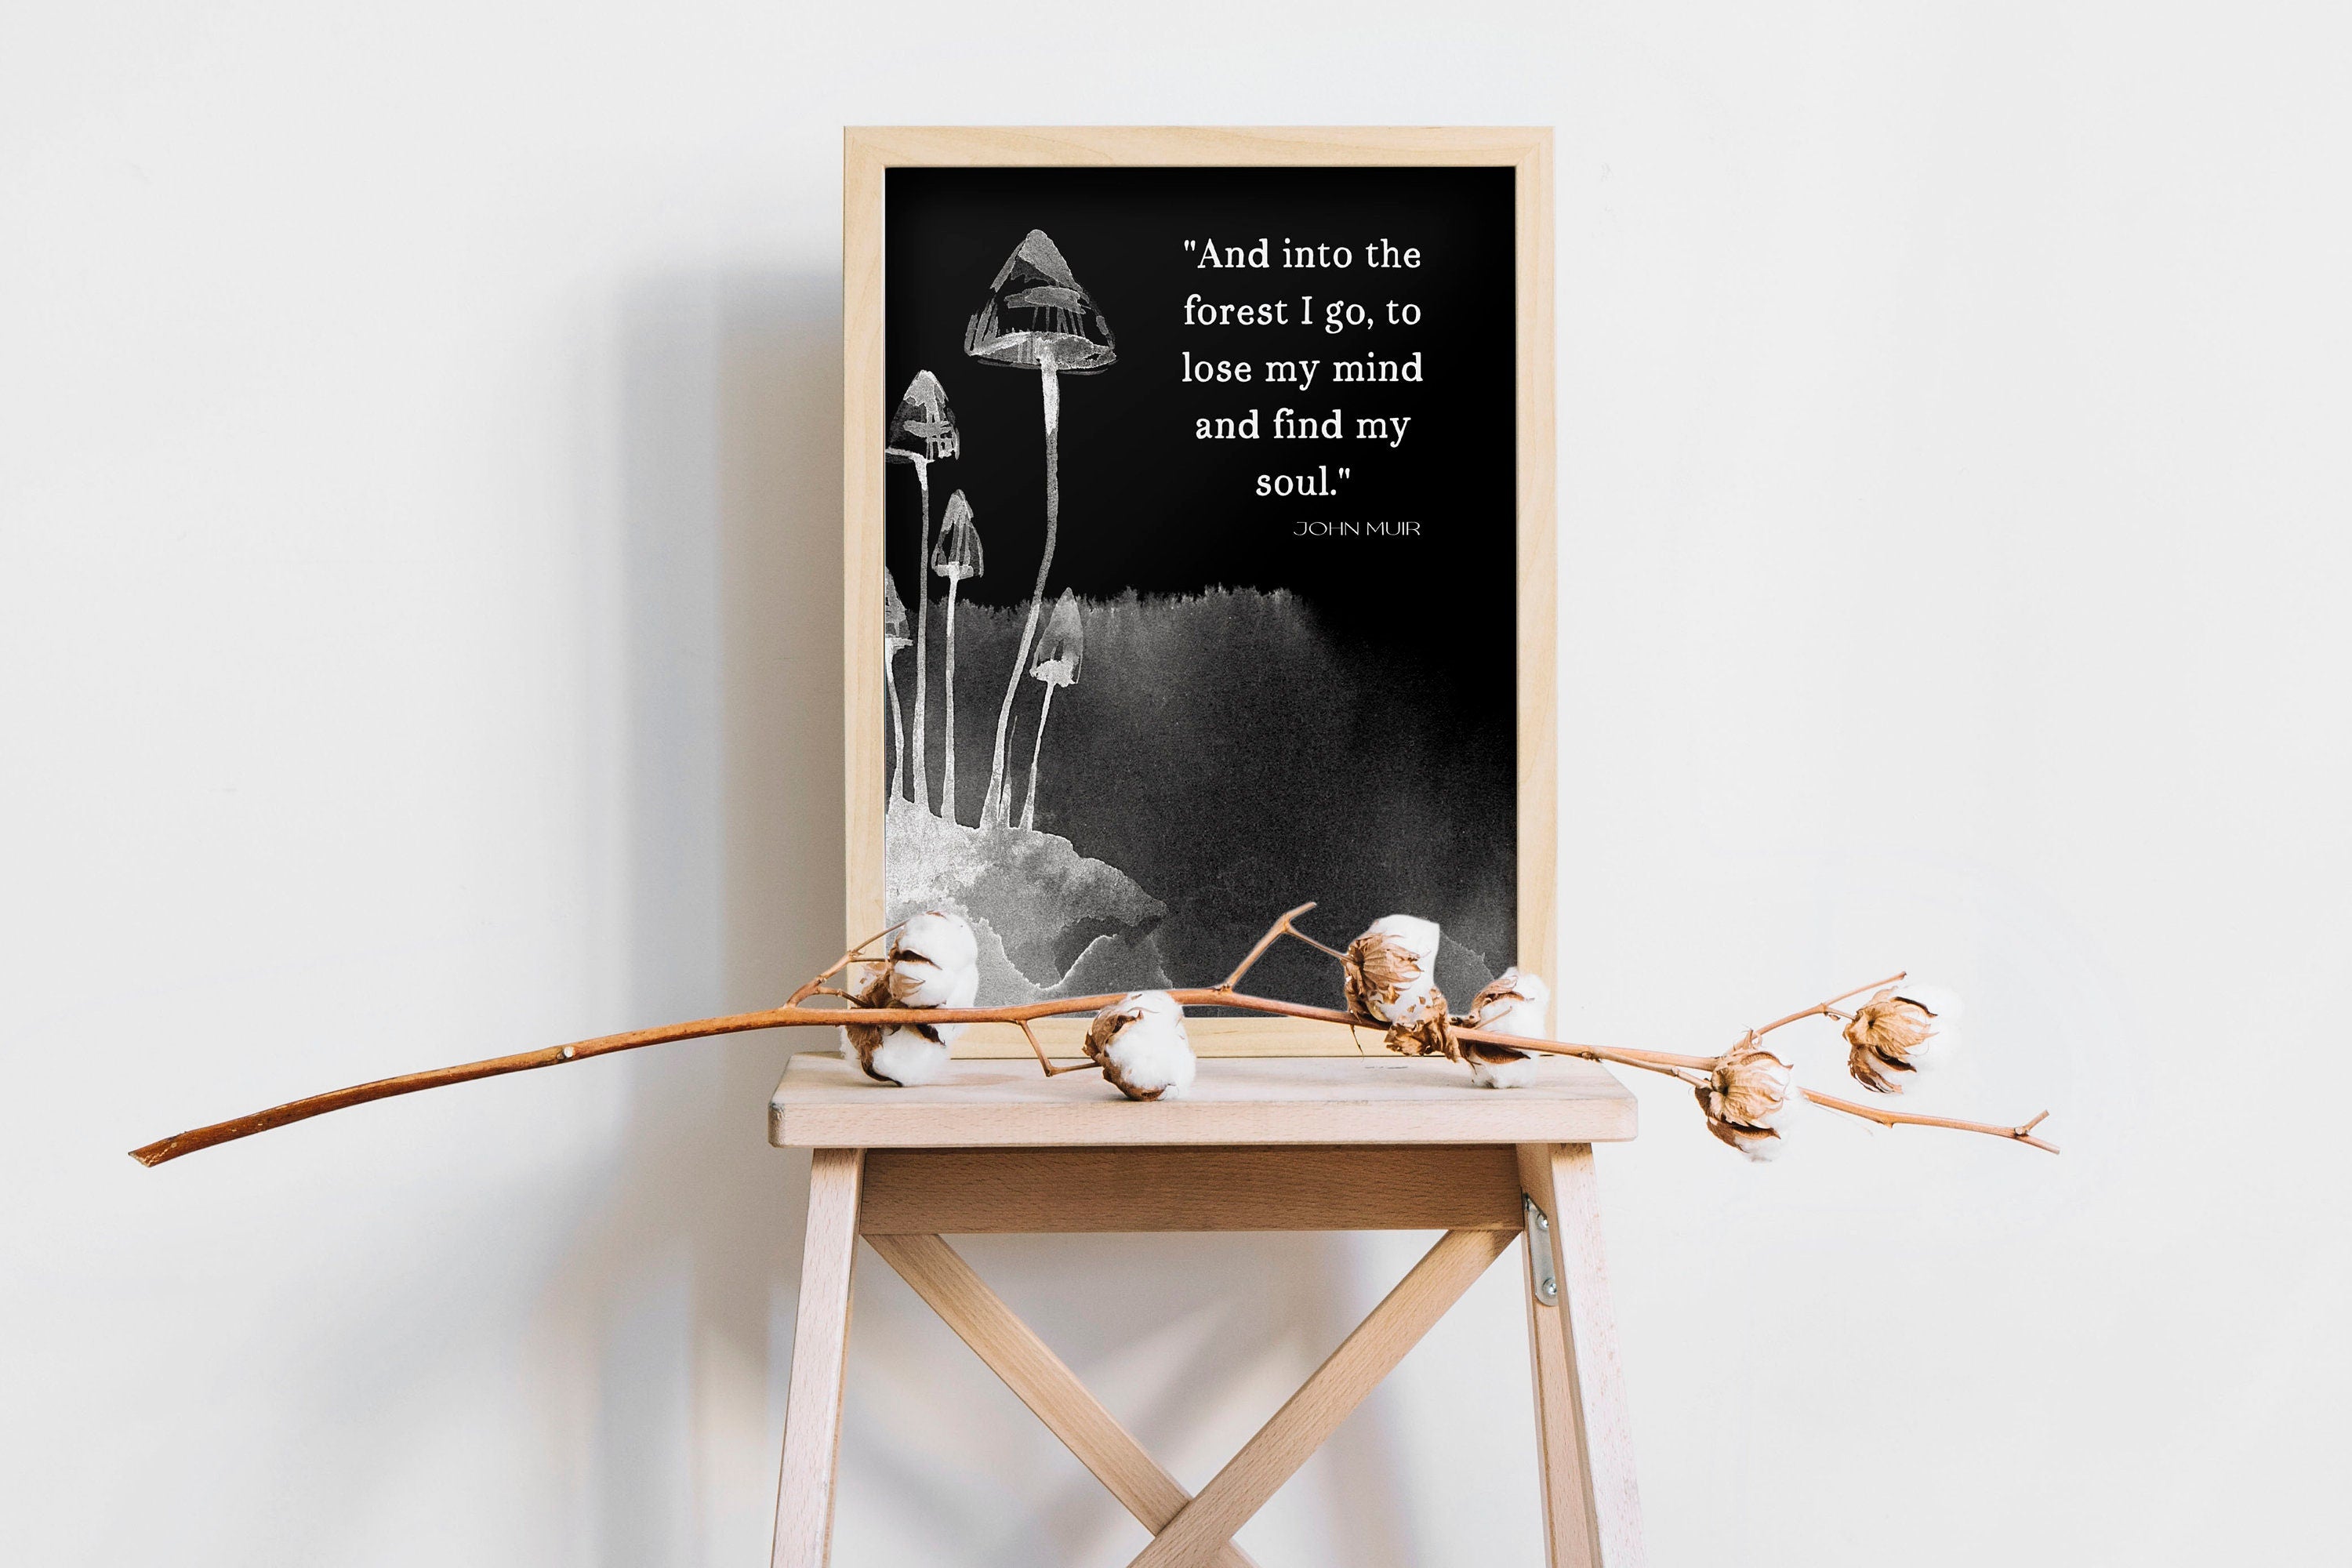 Into the Forest I Go John Muir Quote Print in Black & White, Inspirational Gift for Nature Lovers